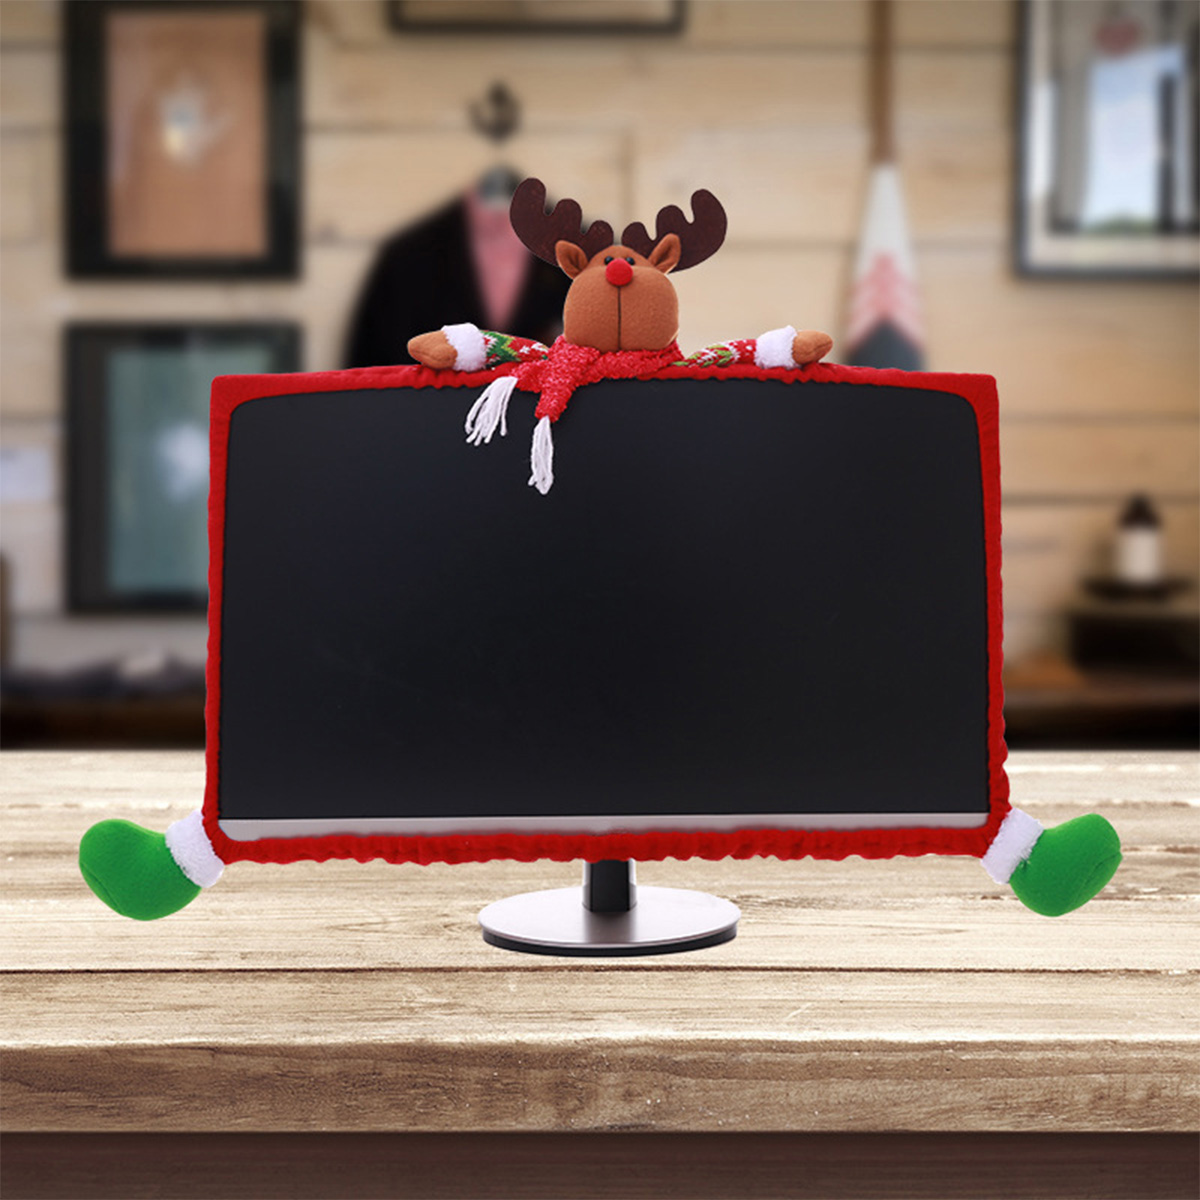 3-Style-Christmas-Computer-Laptop-LCD-Screen-Monitor-Decor-Cover-Suit-19-27quot-1376081-3